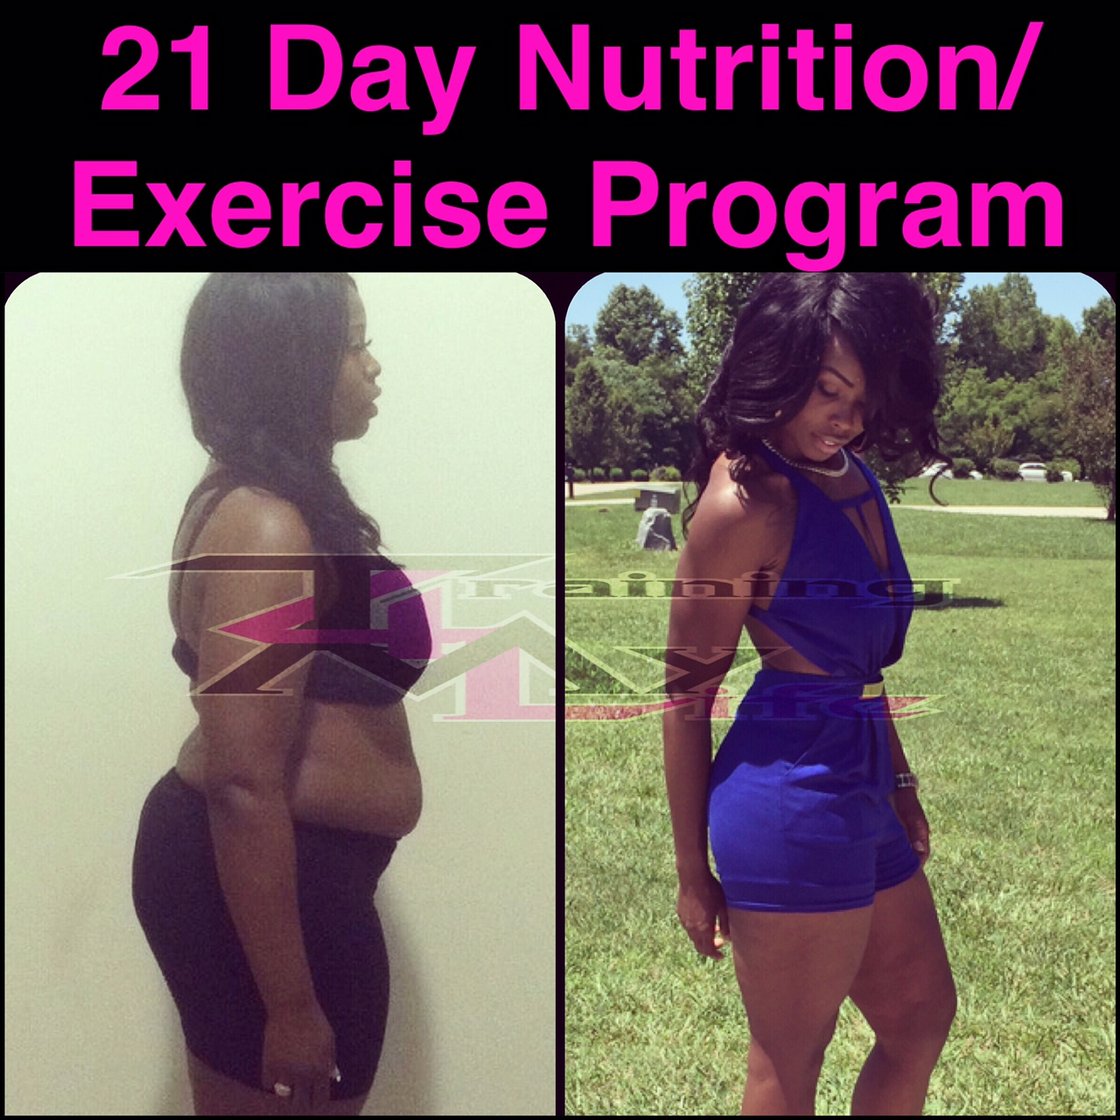 Image of 21 Day Nutrition/Exercise Guide